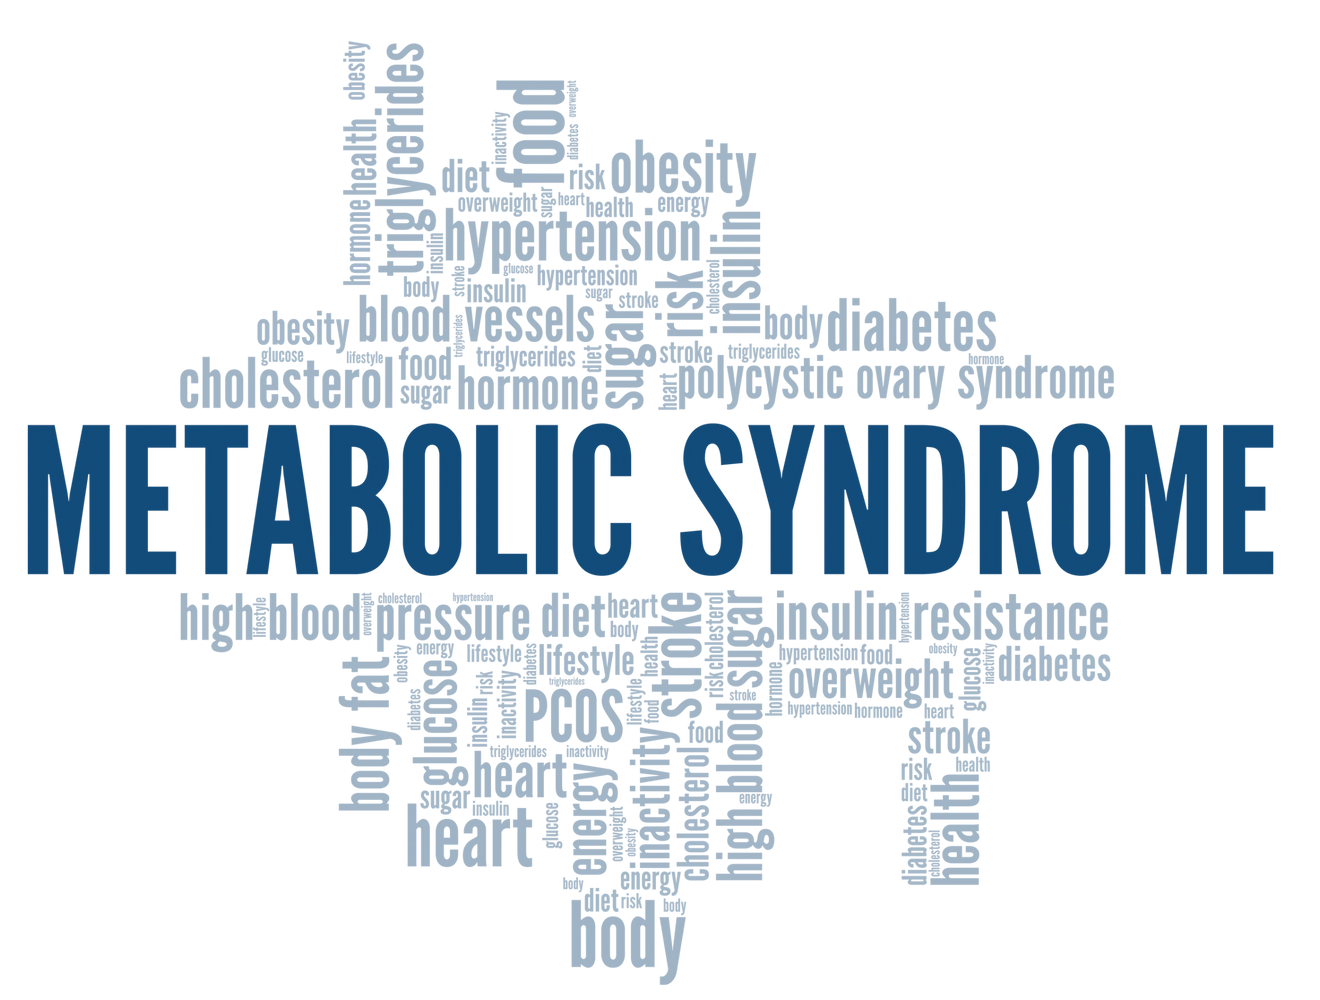 Metabolic Syndrome is a group of health conditions leading to increased risk of heart diseases.